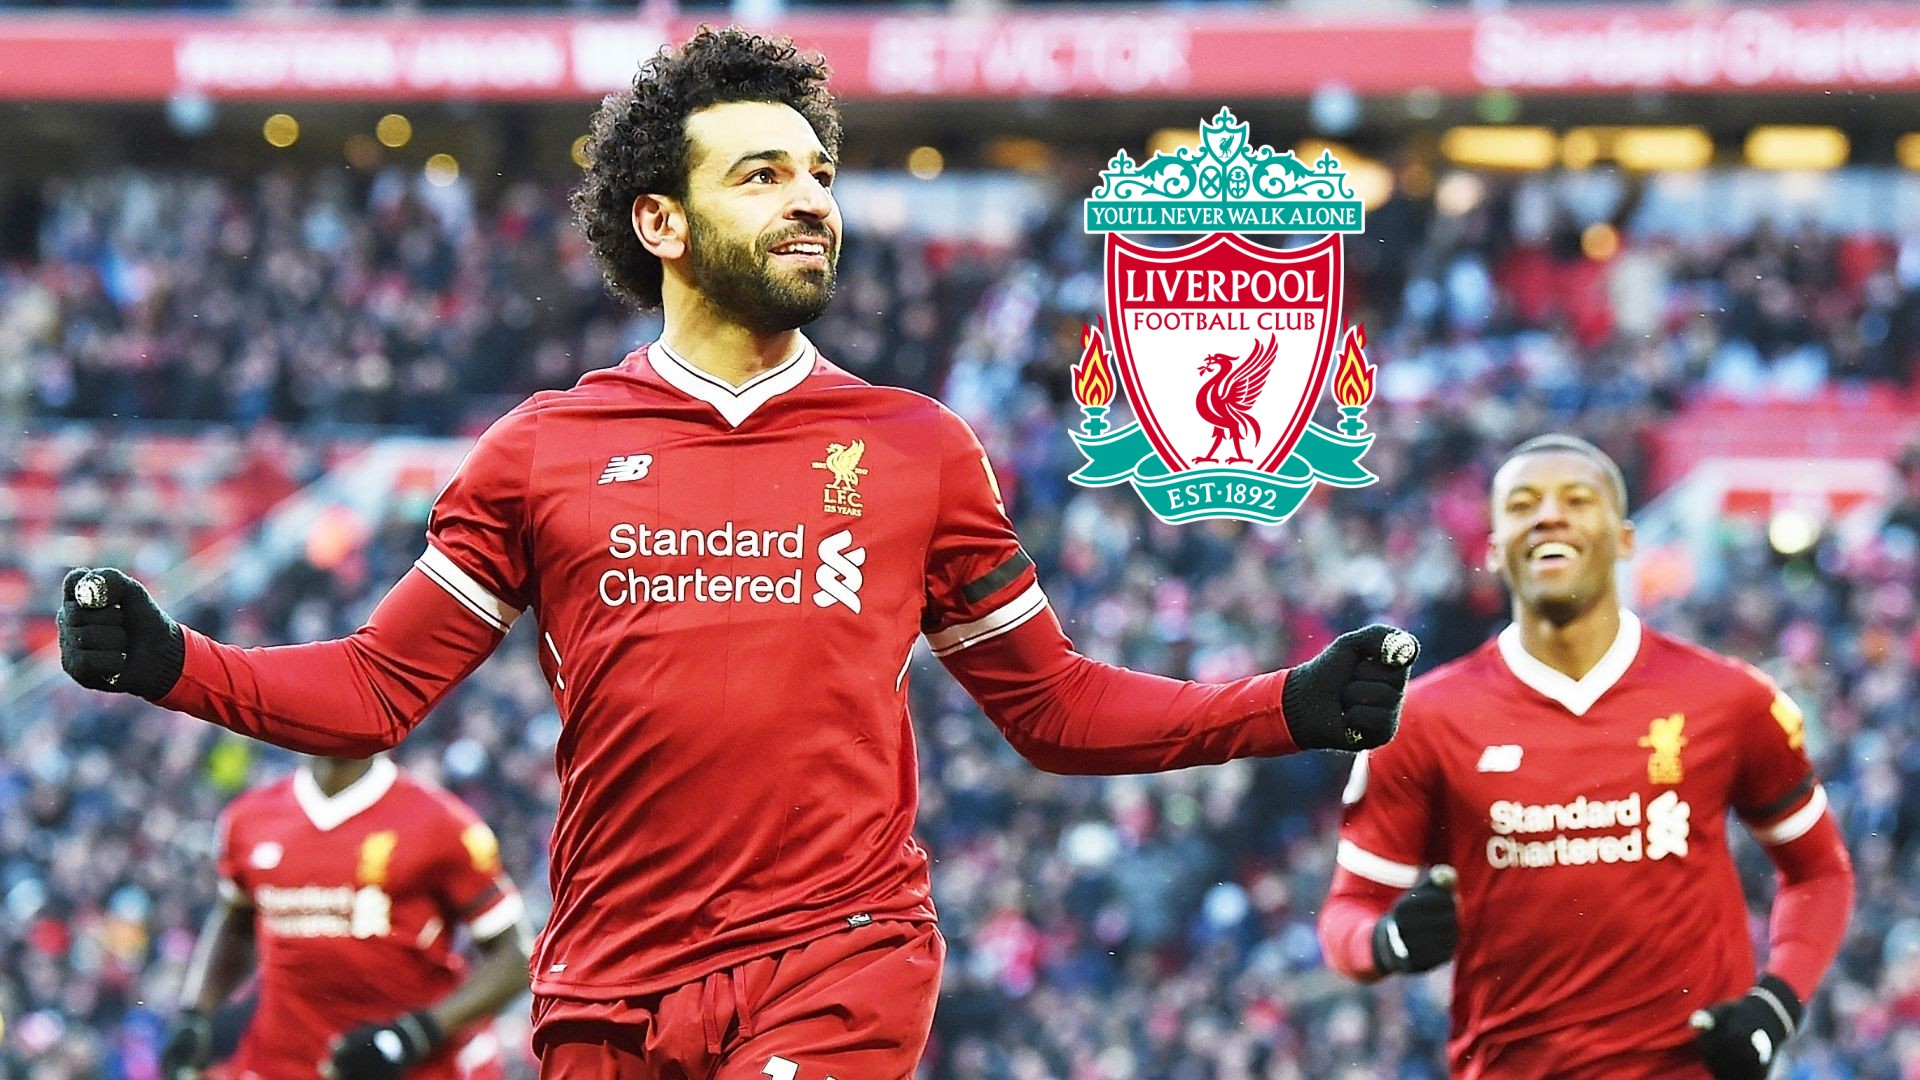 Mohamed Salah Liverpool Background Wallpaper HD with image resolution 1920x1080 pixel. You can make this wallpaper for your Desktop Computer Backgrounds, Mac Wallpapers, Android Lock screen or iPhone Screensavers